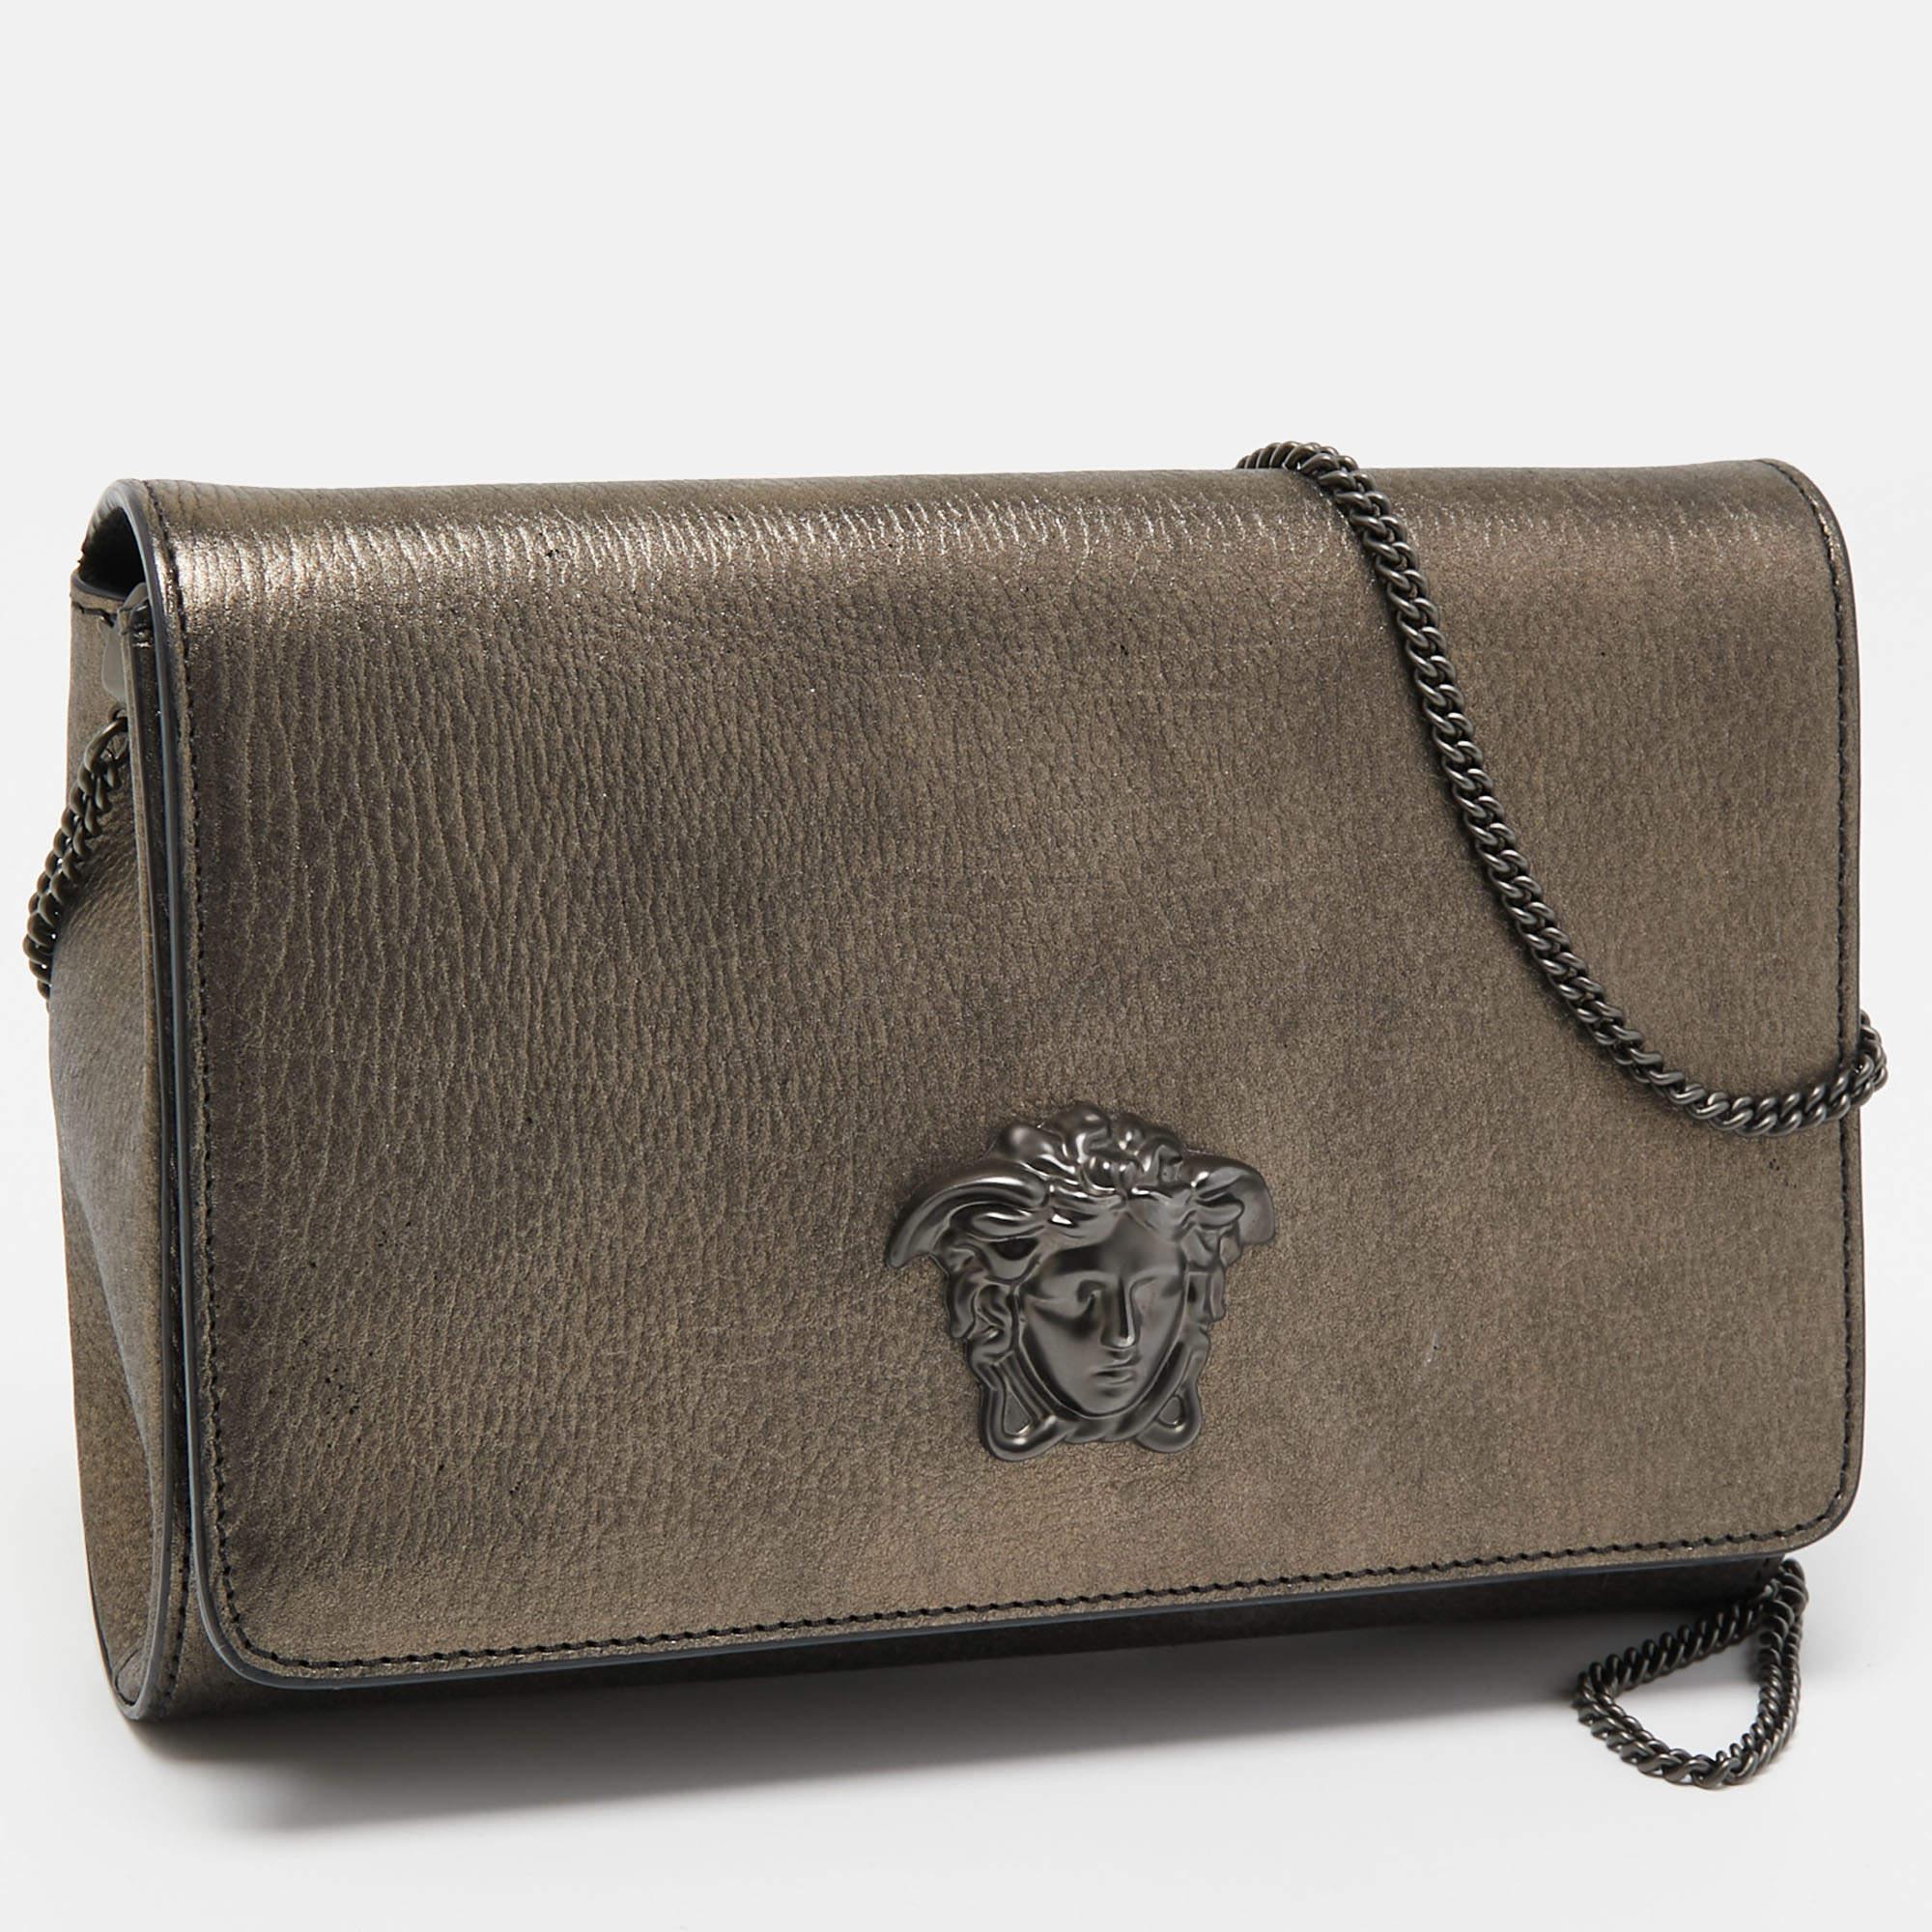 This clutch from Versace is designed in a metallic leather body. It brings a Medusa-adorned flap to secure the interior which is lined with satin. It comes held by a chain and is perfect for evenings.

